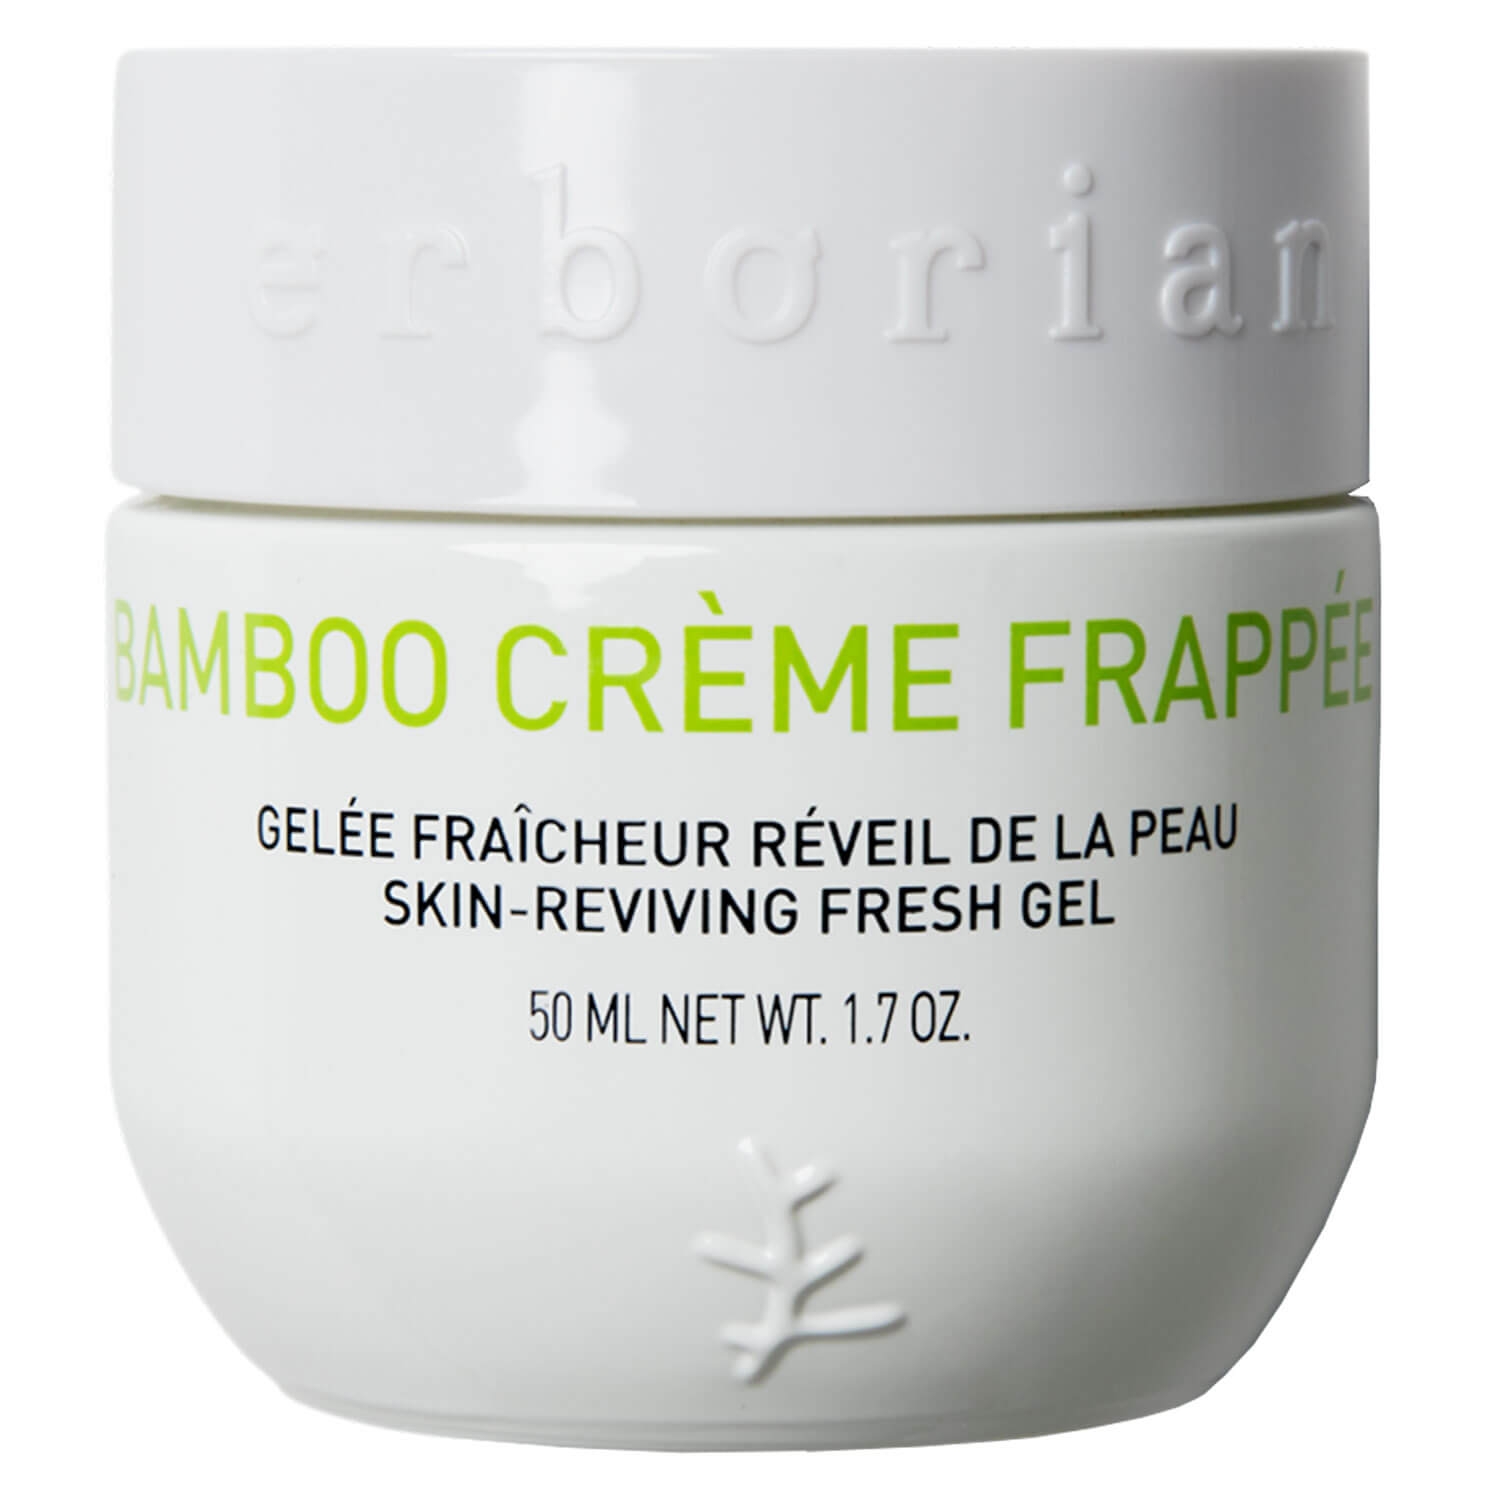 Product image from Bamboo - Crème Frappée